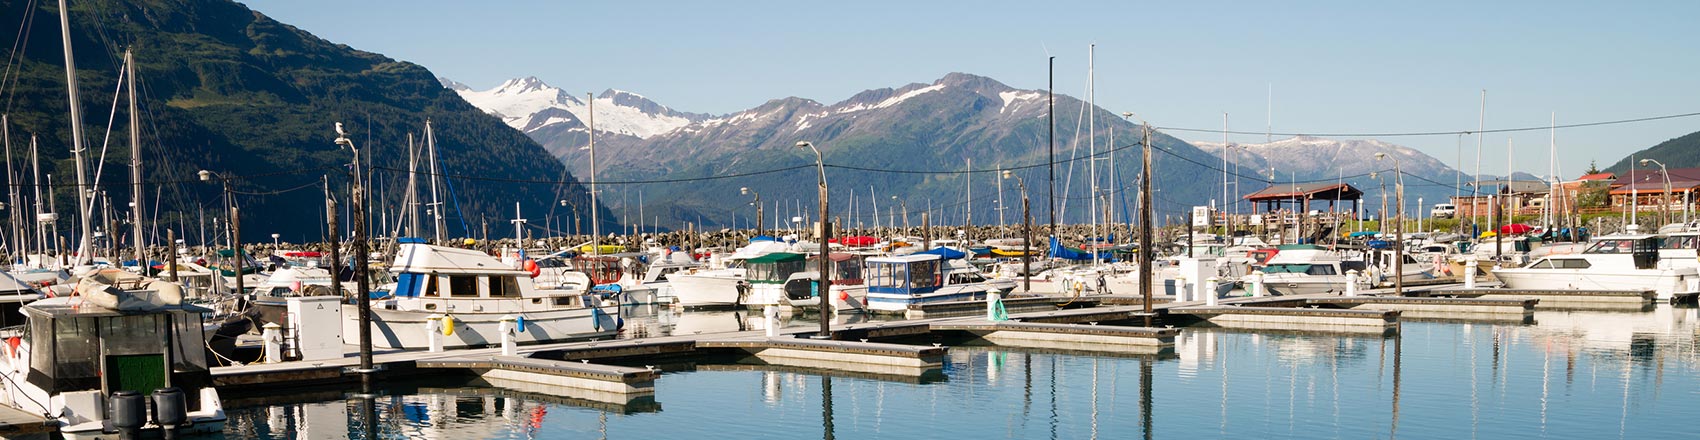 The Whittier Harbor with Alaskan mountains in the background.